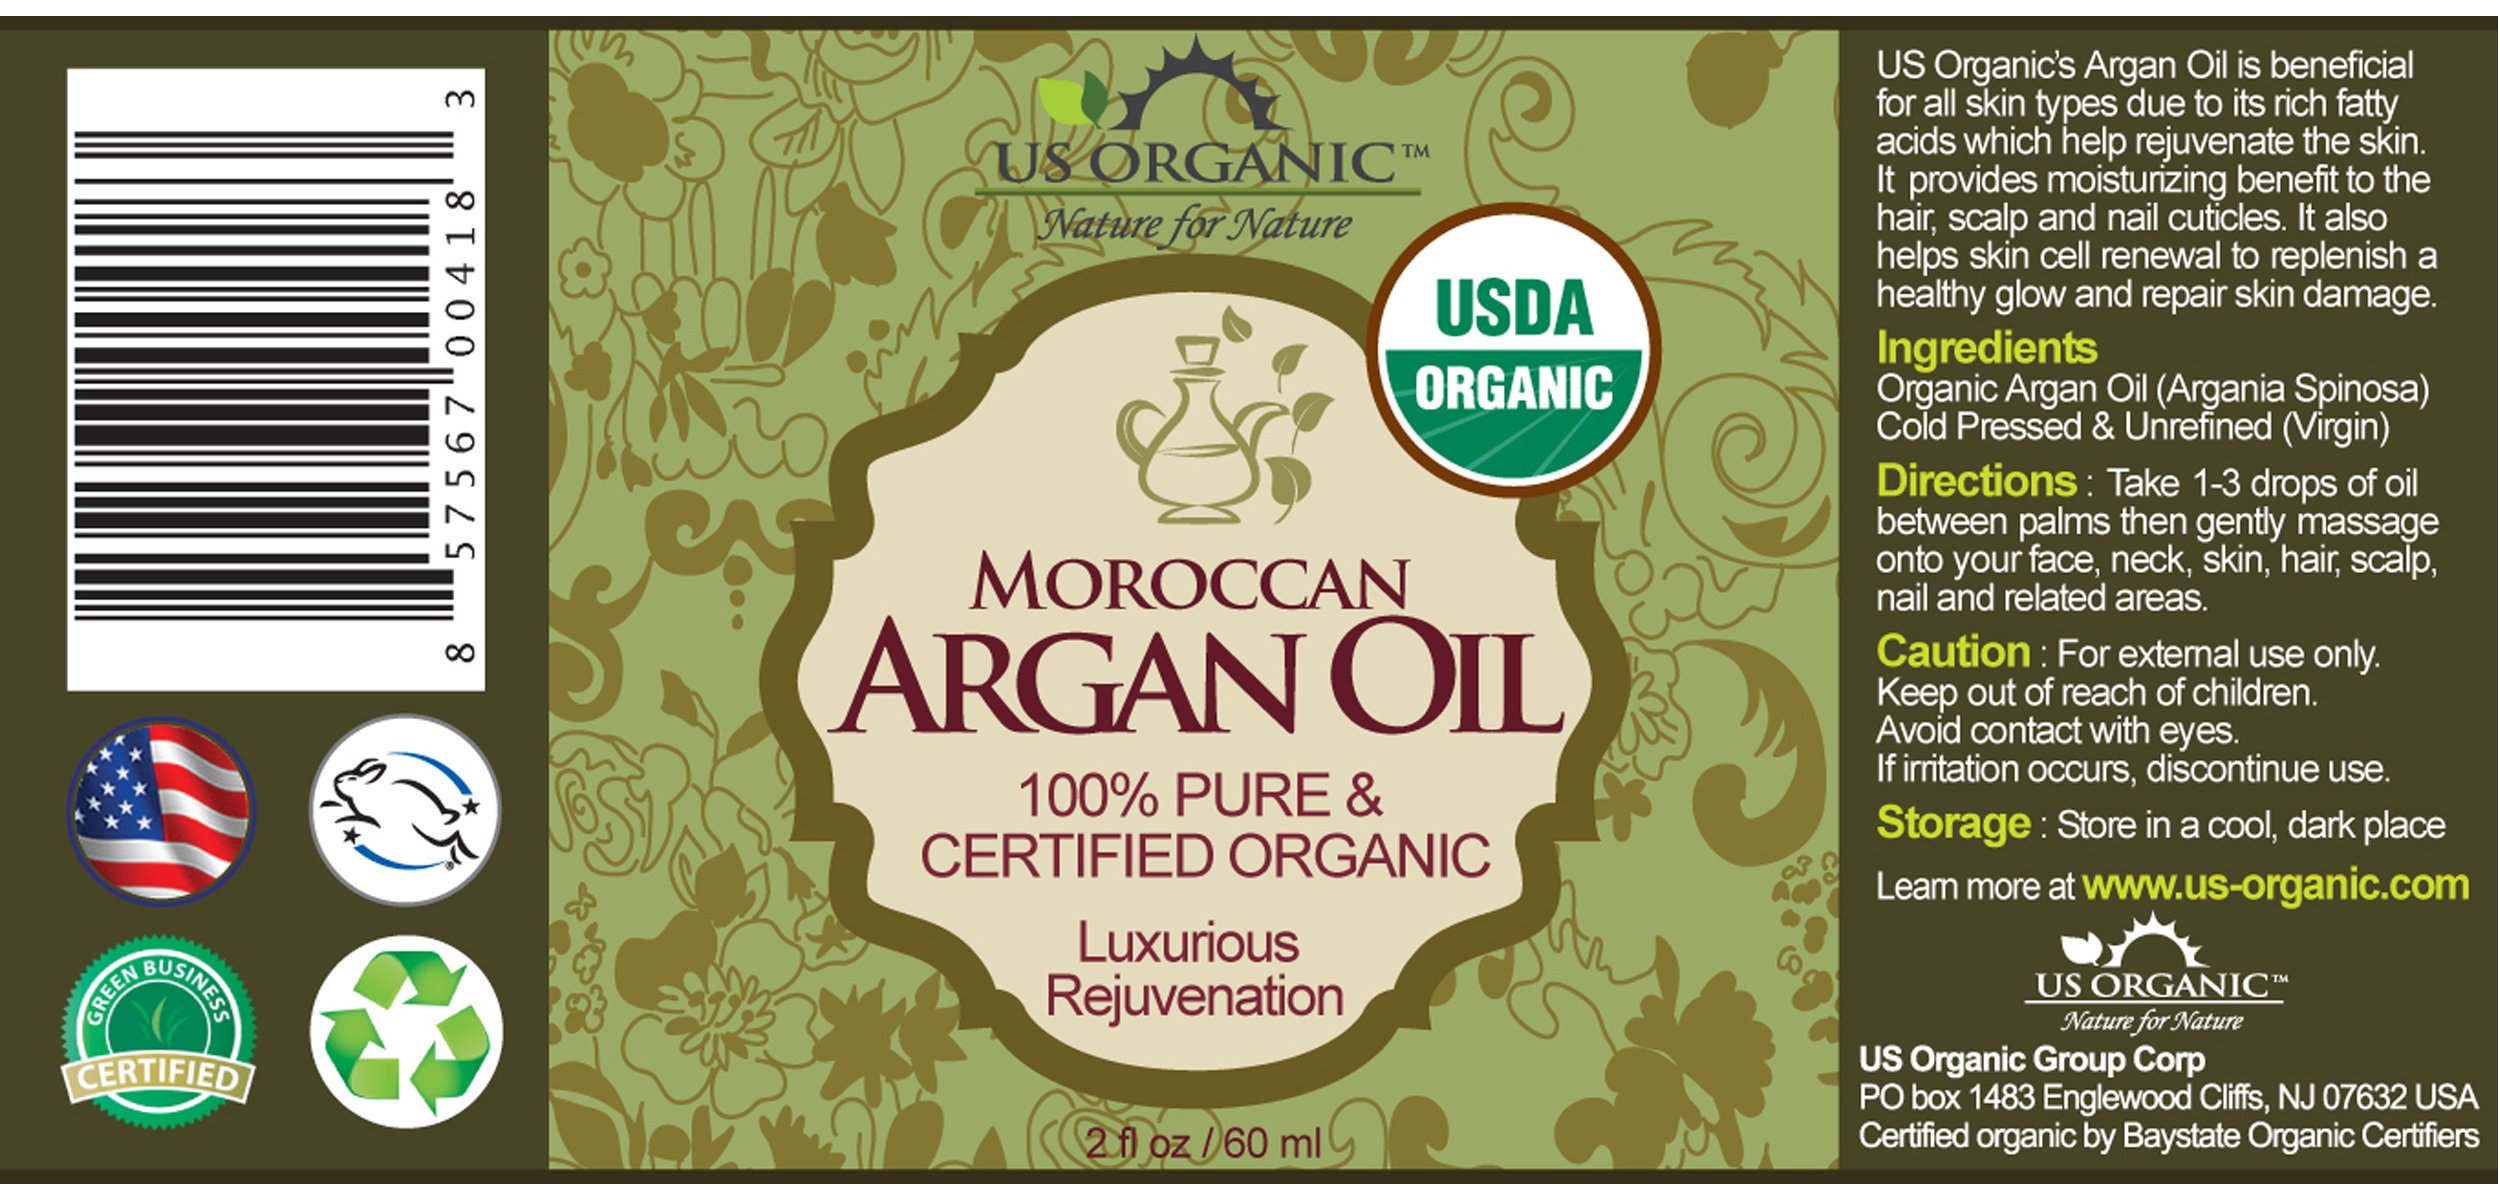 US Organic Moroccan Argan Oil, USDA Certified Organic,100% Pure & Natural, Cold Pressed Virgin, Unrefined, 2 Oz in Amber Glass Bottle, for Hair Treatment, Skin, Nail, Cuticle, Sourced from Morocco.